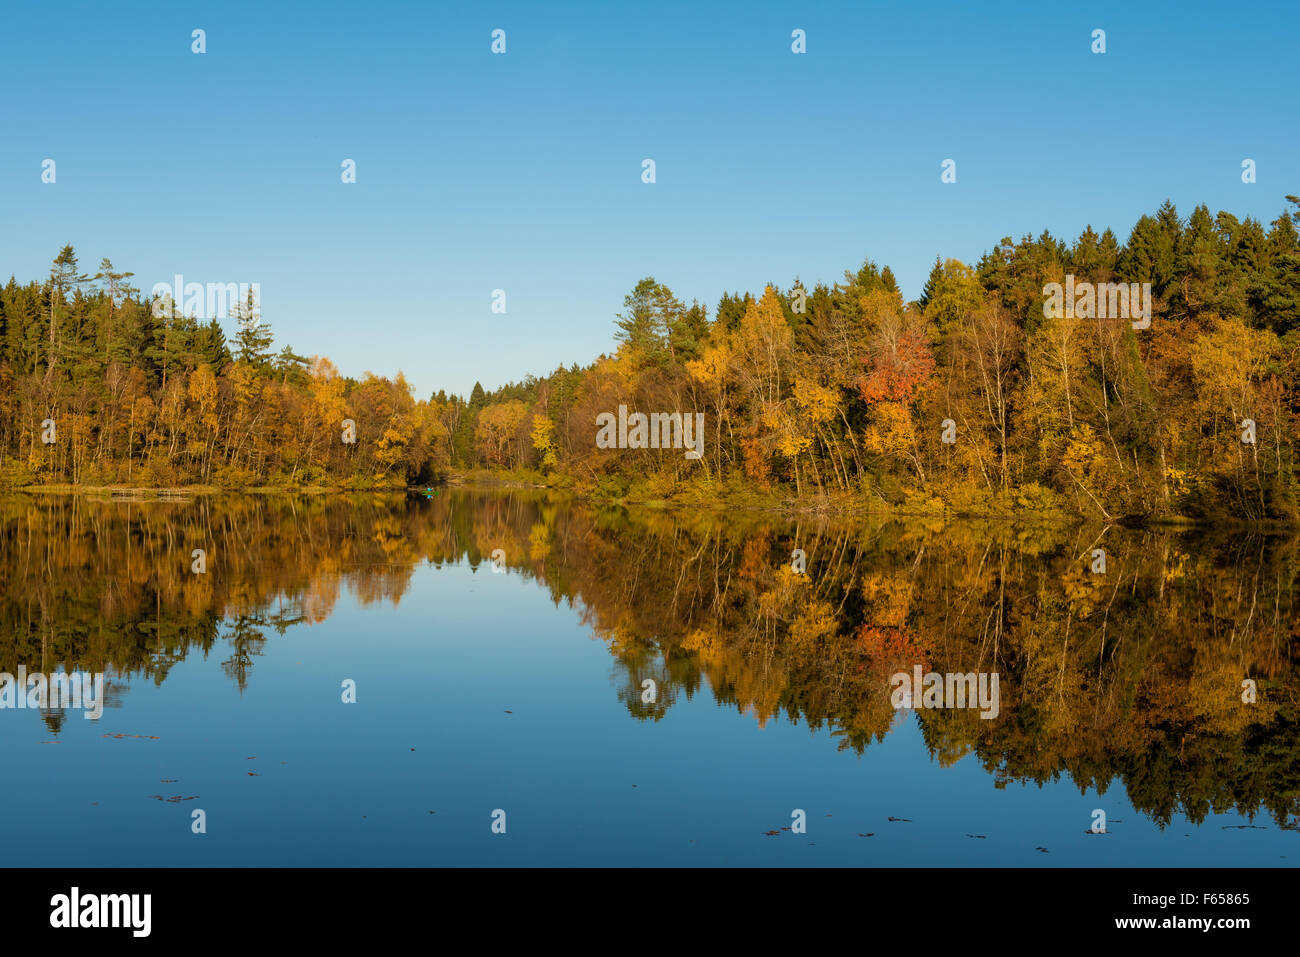 Colorful reflection of forest and lake in the fall season. Stock Photo